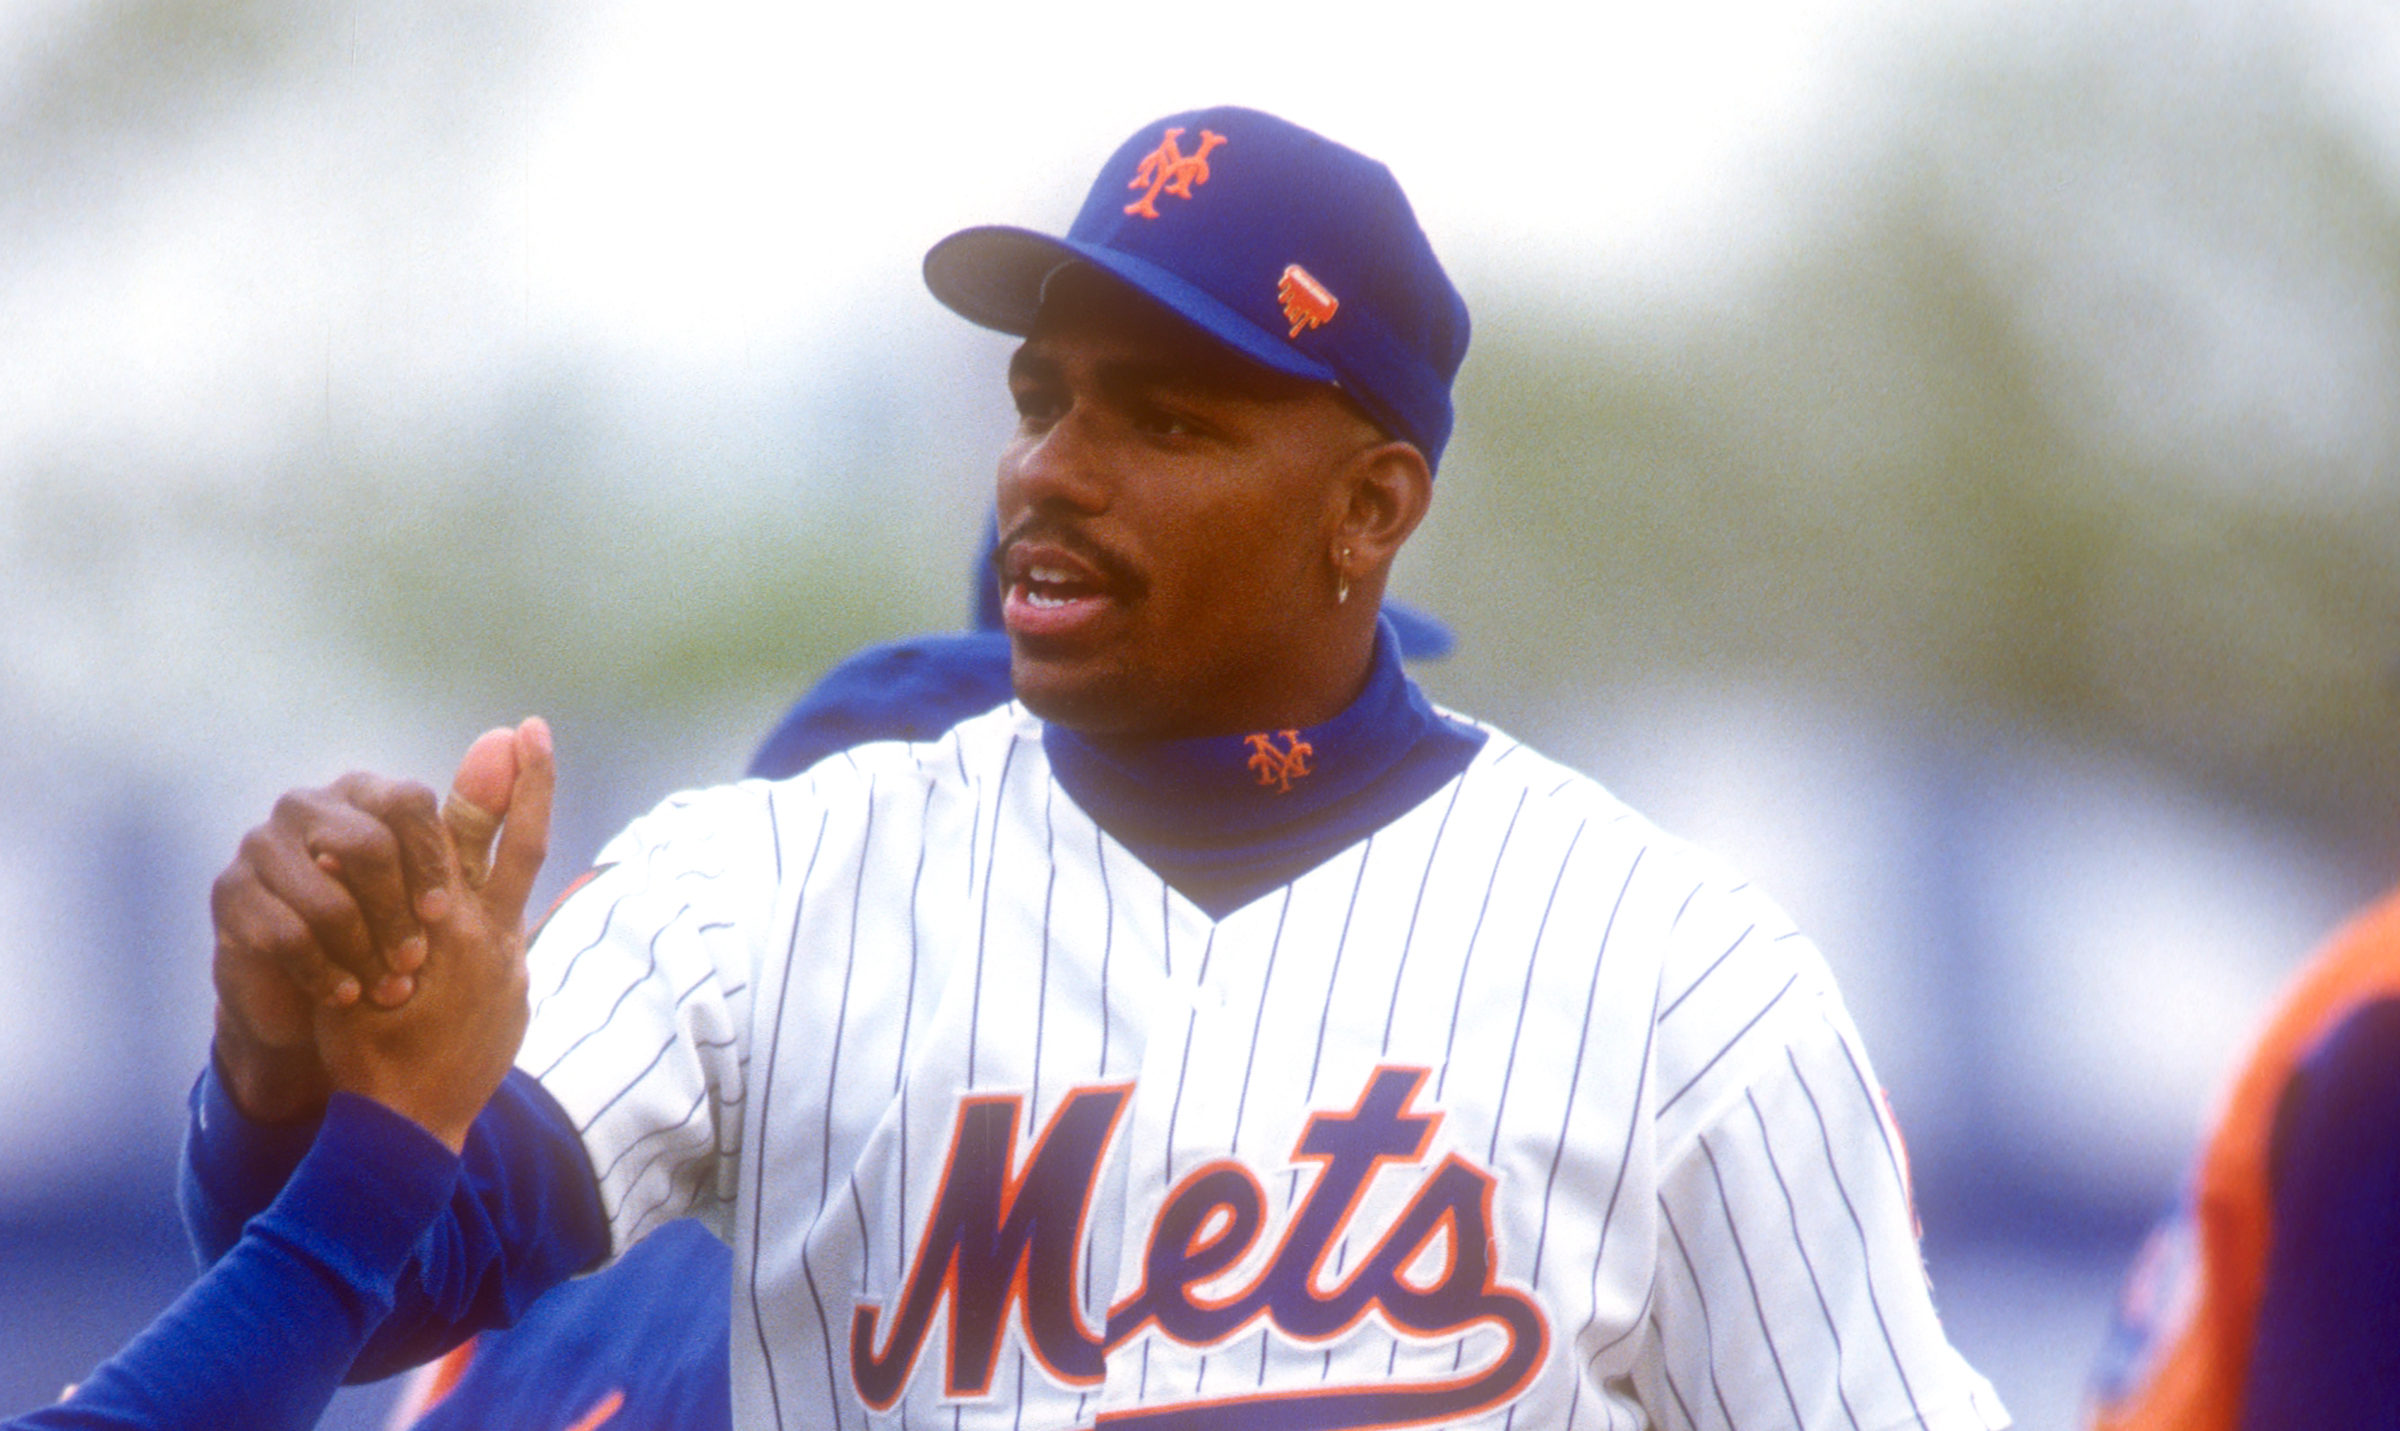 Every July 1 Is a $1 Million Payday for Former Mets Player Bobby